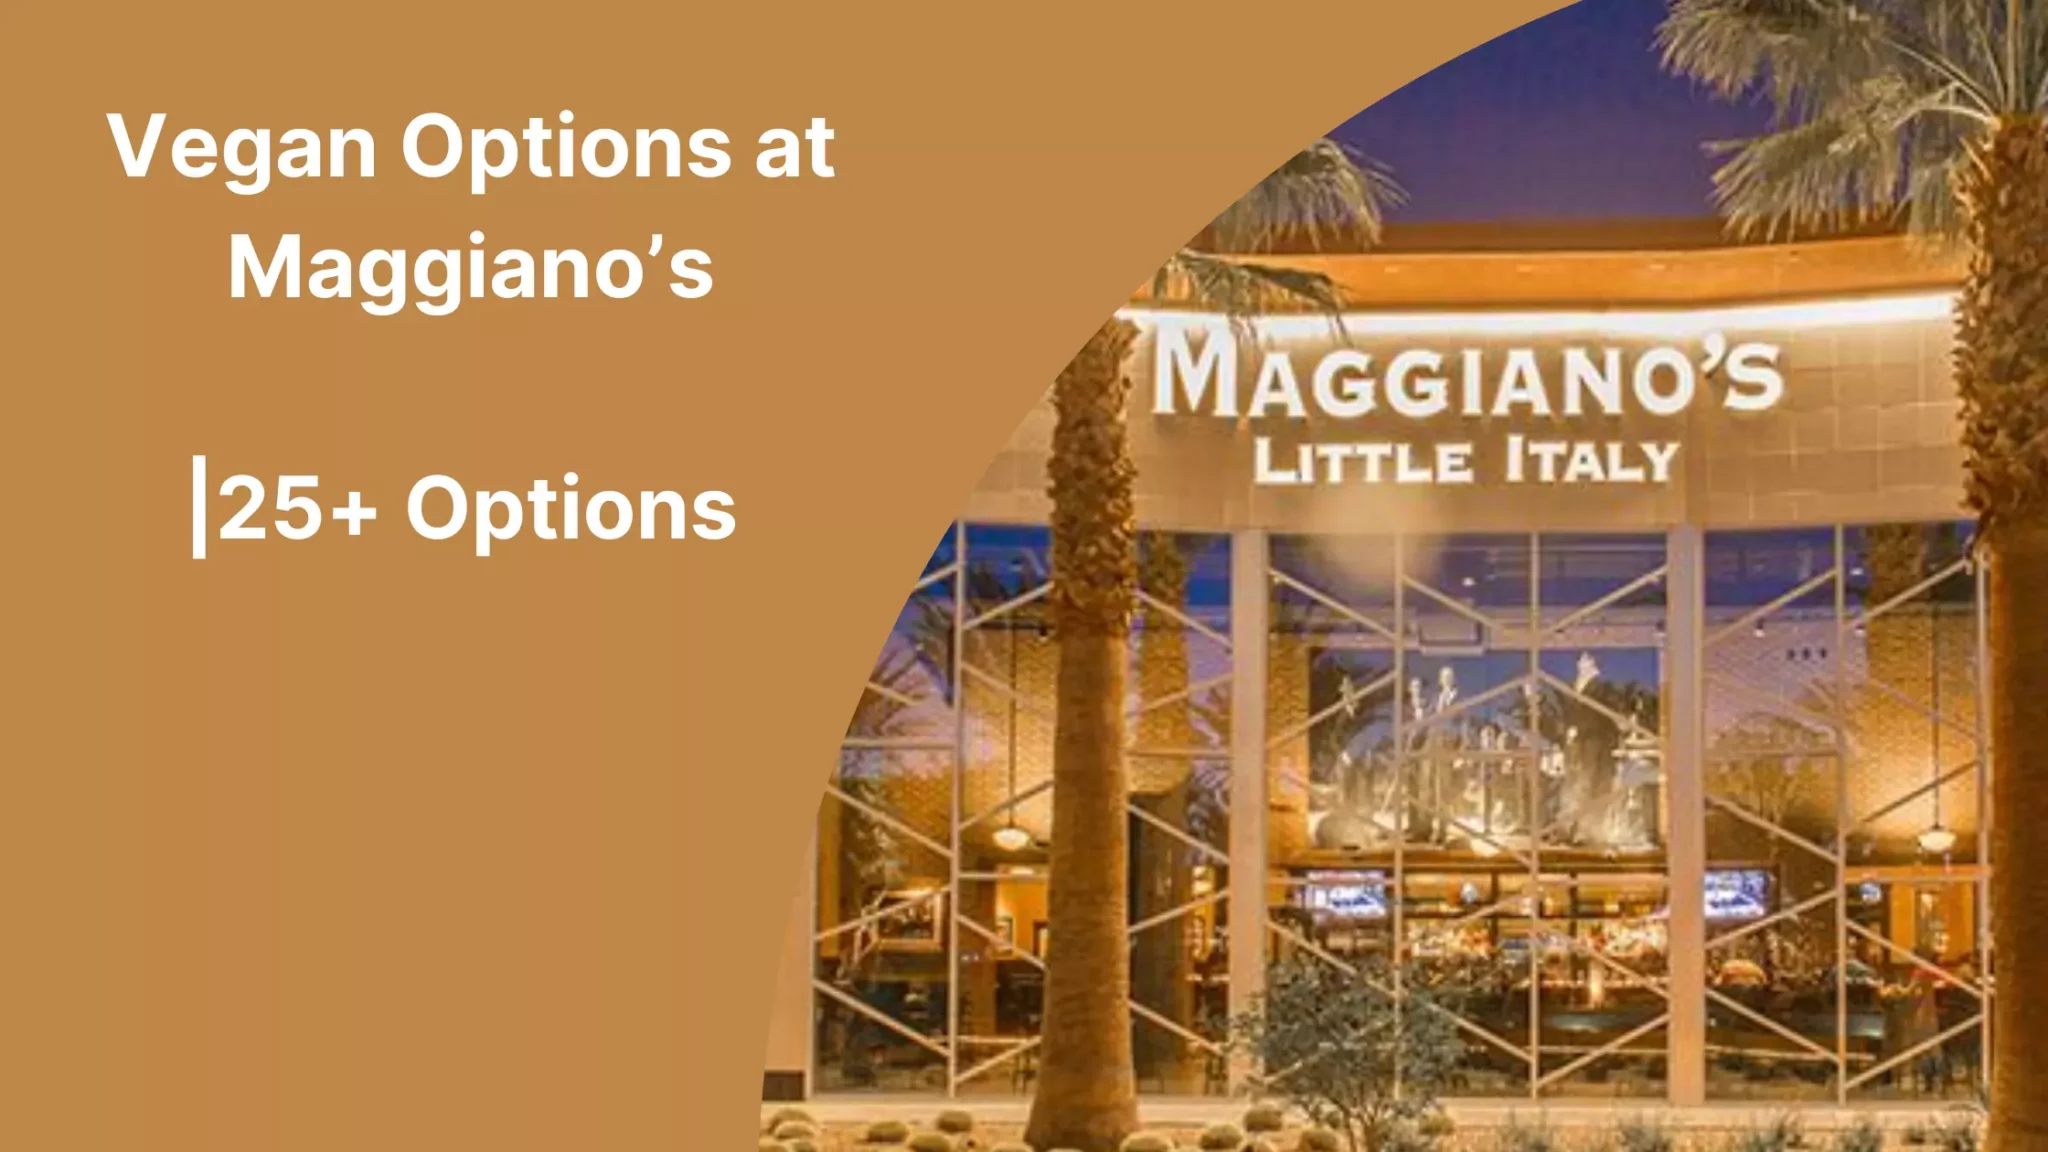 Vegan Options at Maggiano’s